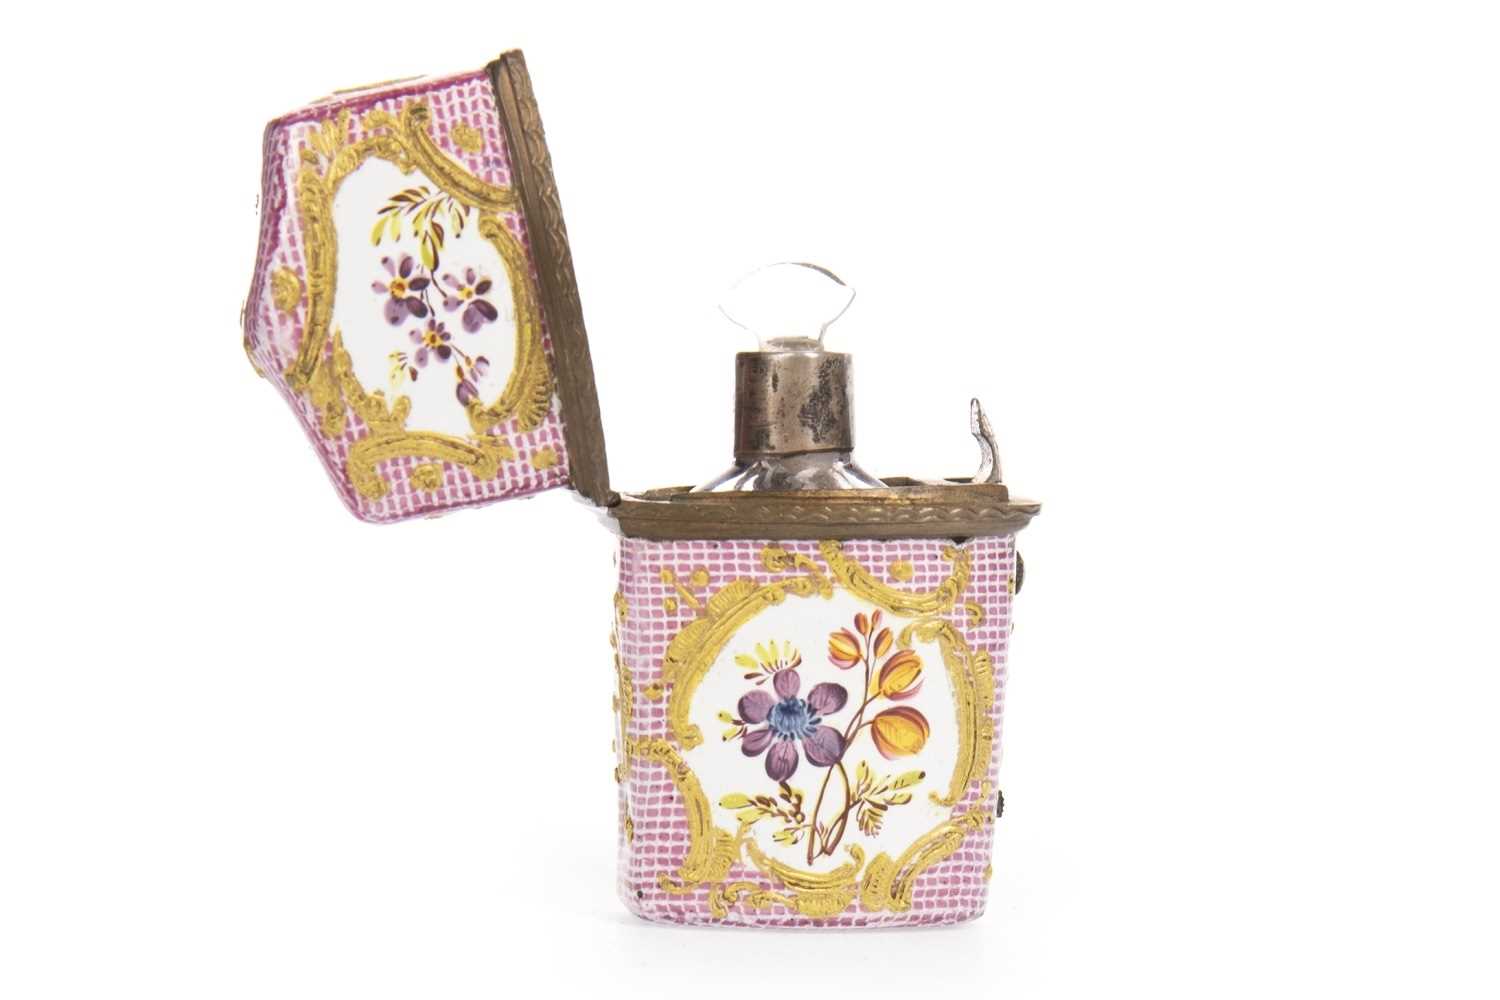 Lot 1303 - A LATE 19TH CENTURY FLORAL PORCELAIN AND ENAMEL PAINTED CASED PERFUME BOTTLE